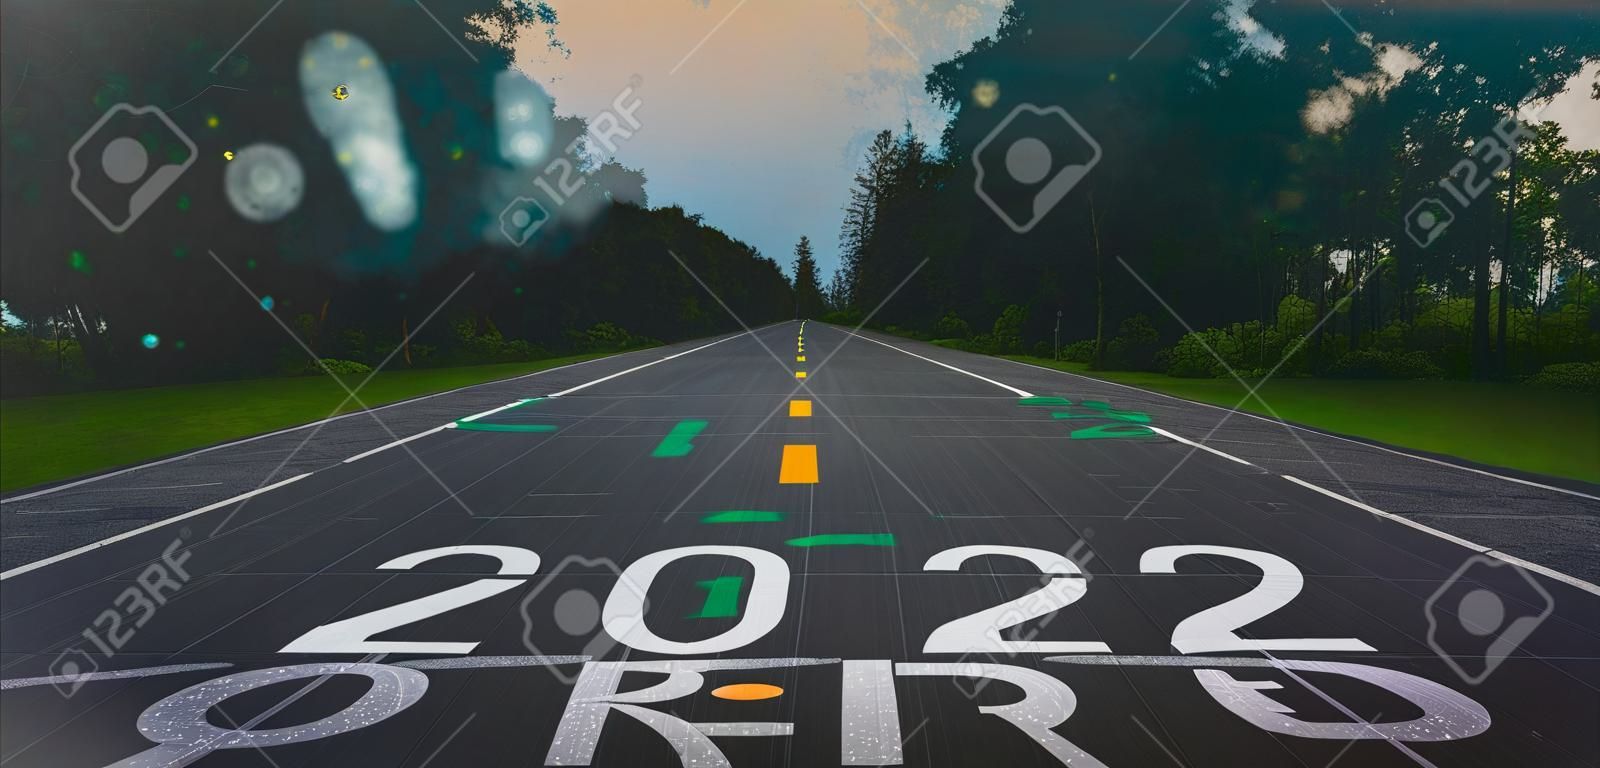 2022 new year or start straight concept.Virtual dashboardWord 2022 written on the asphalt road.Concept of challenge or career path and change with innovation business and technology.